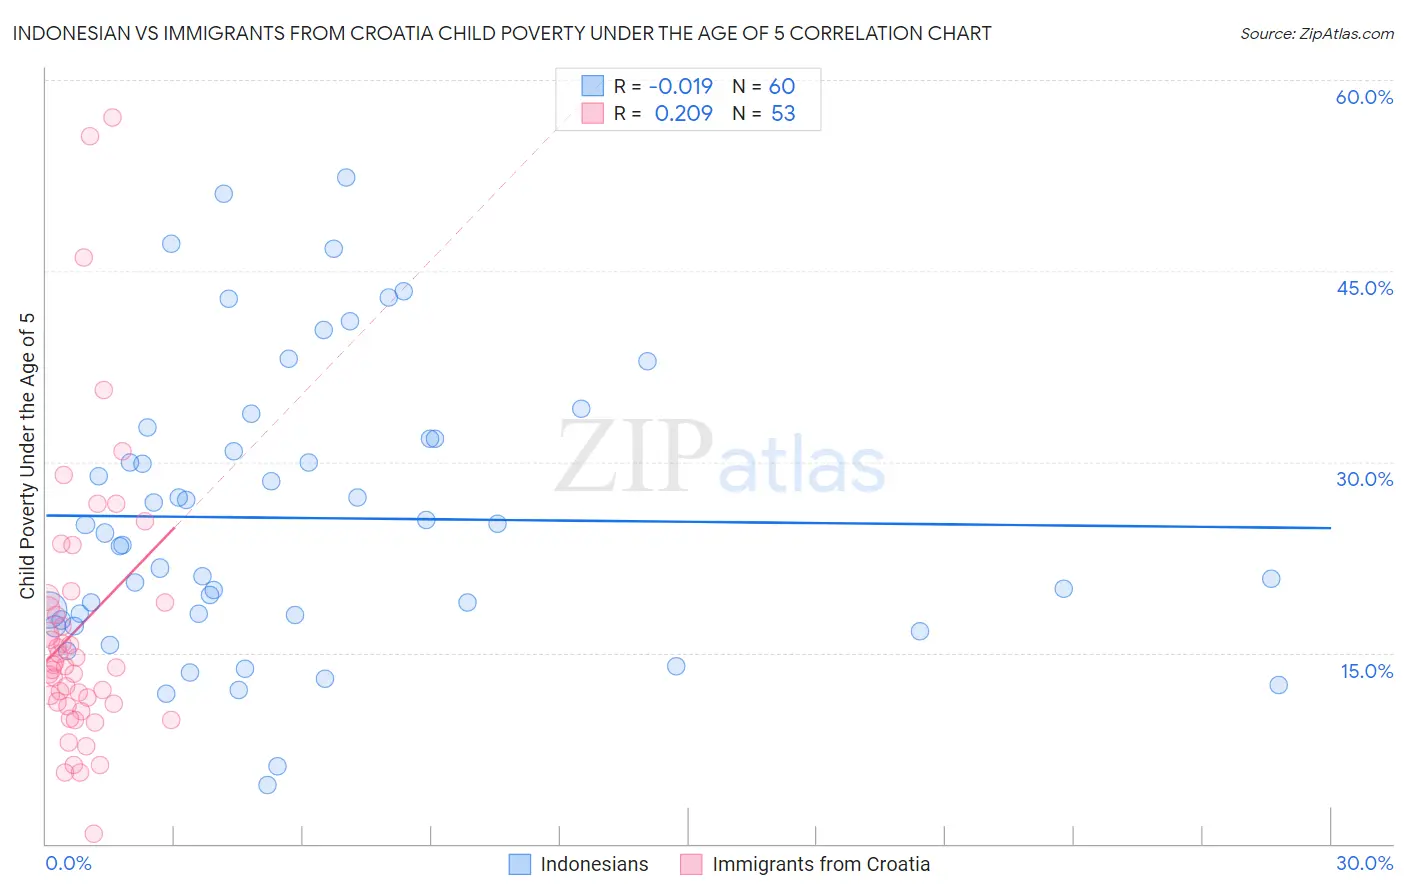 Indonesian vs Immigrants from Croatia Child Poverty Under the Age of 5